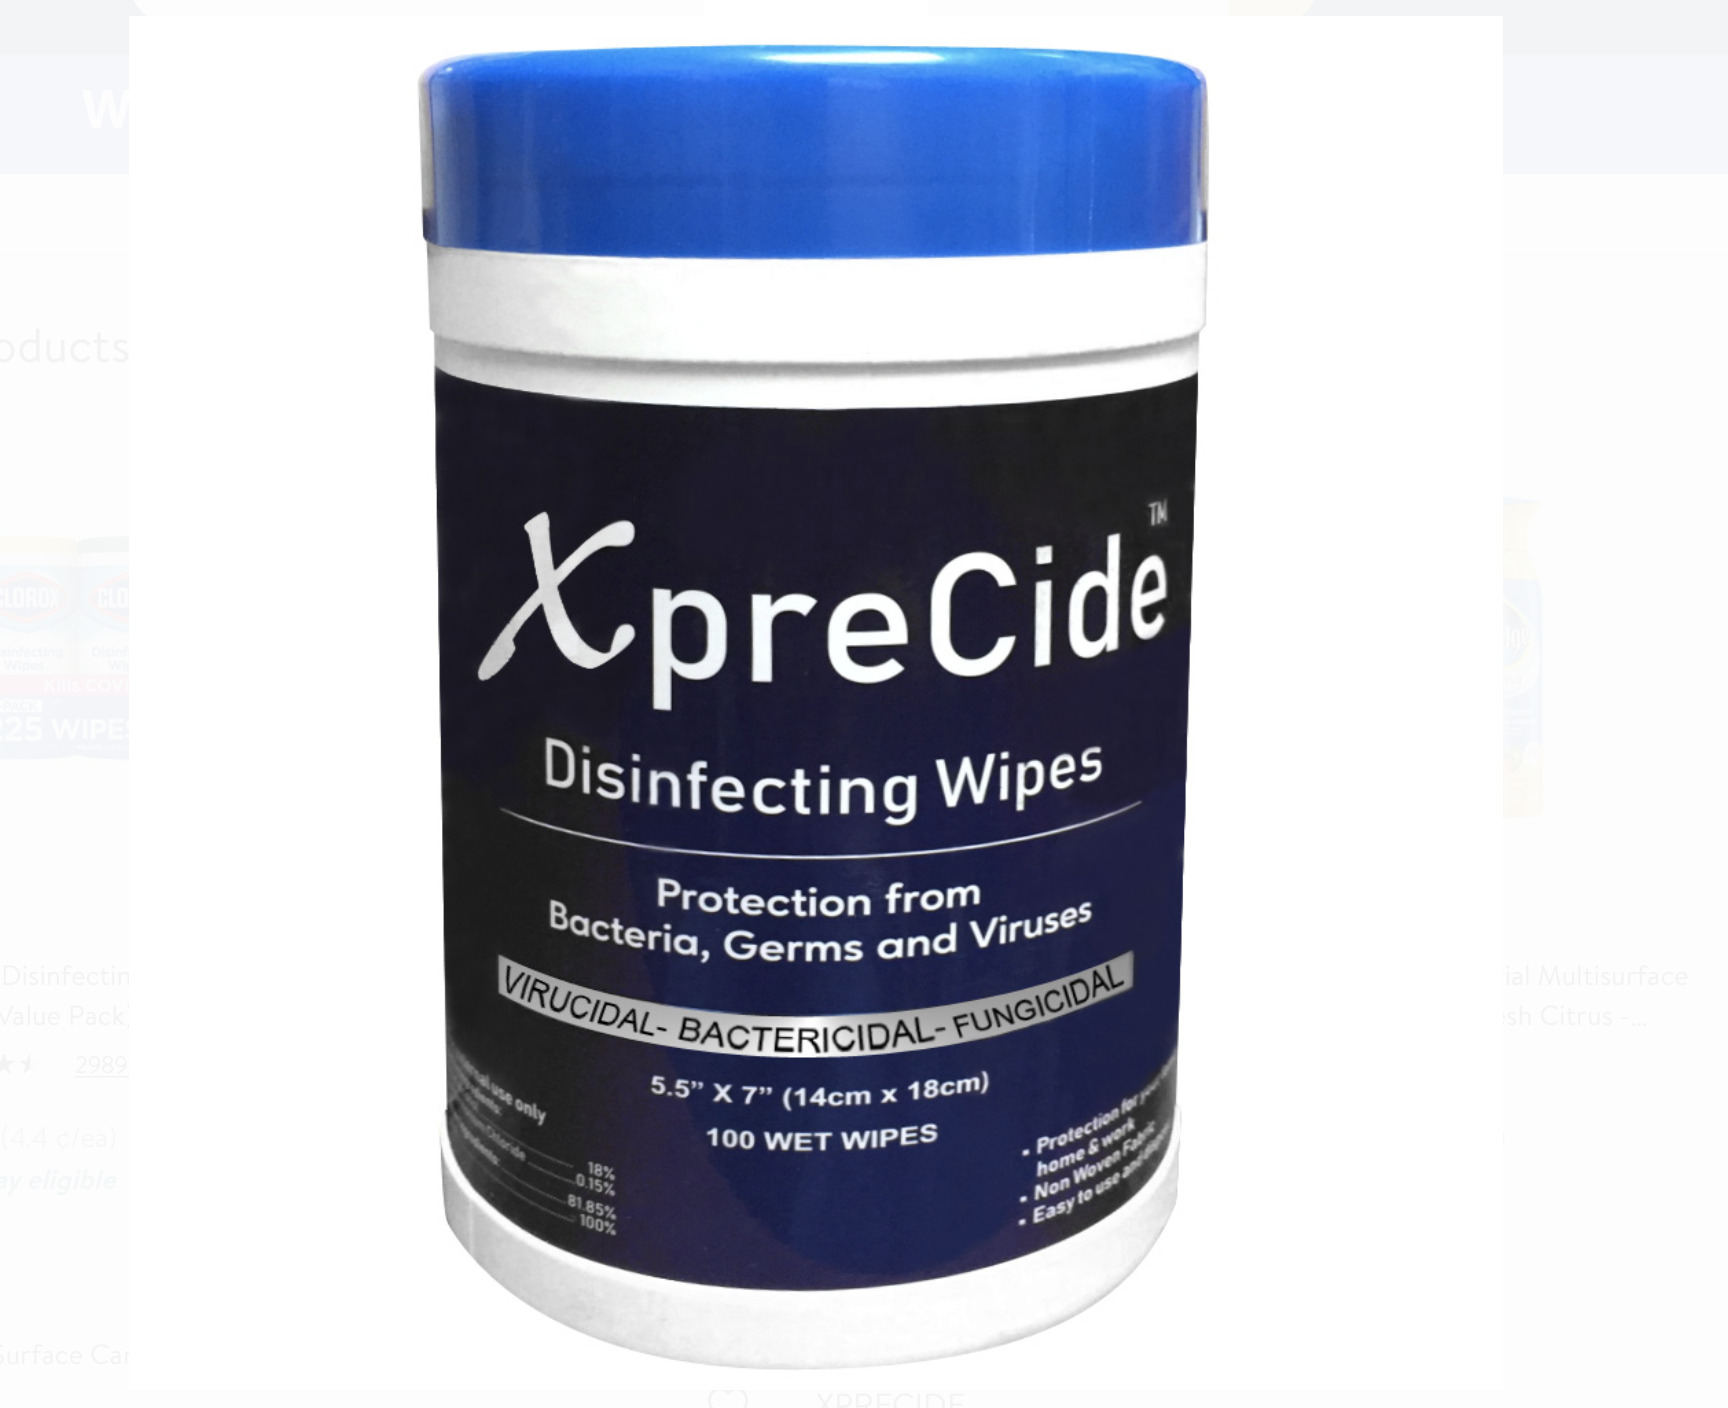 XpreCide Disinfecting Wipes 100 count